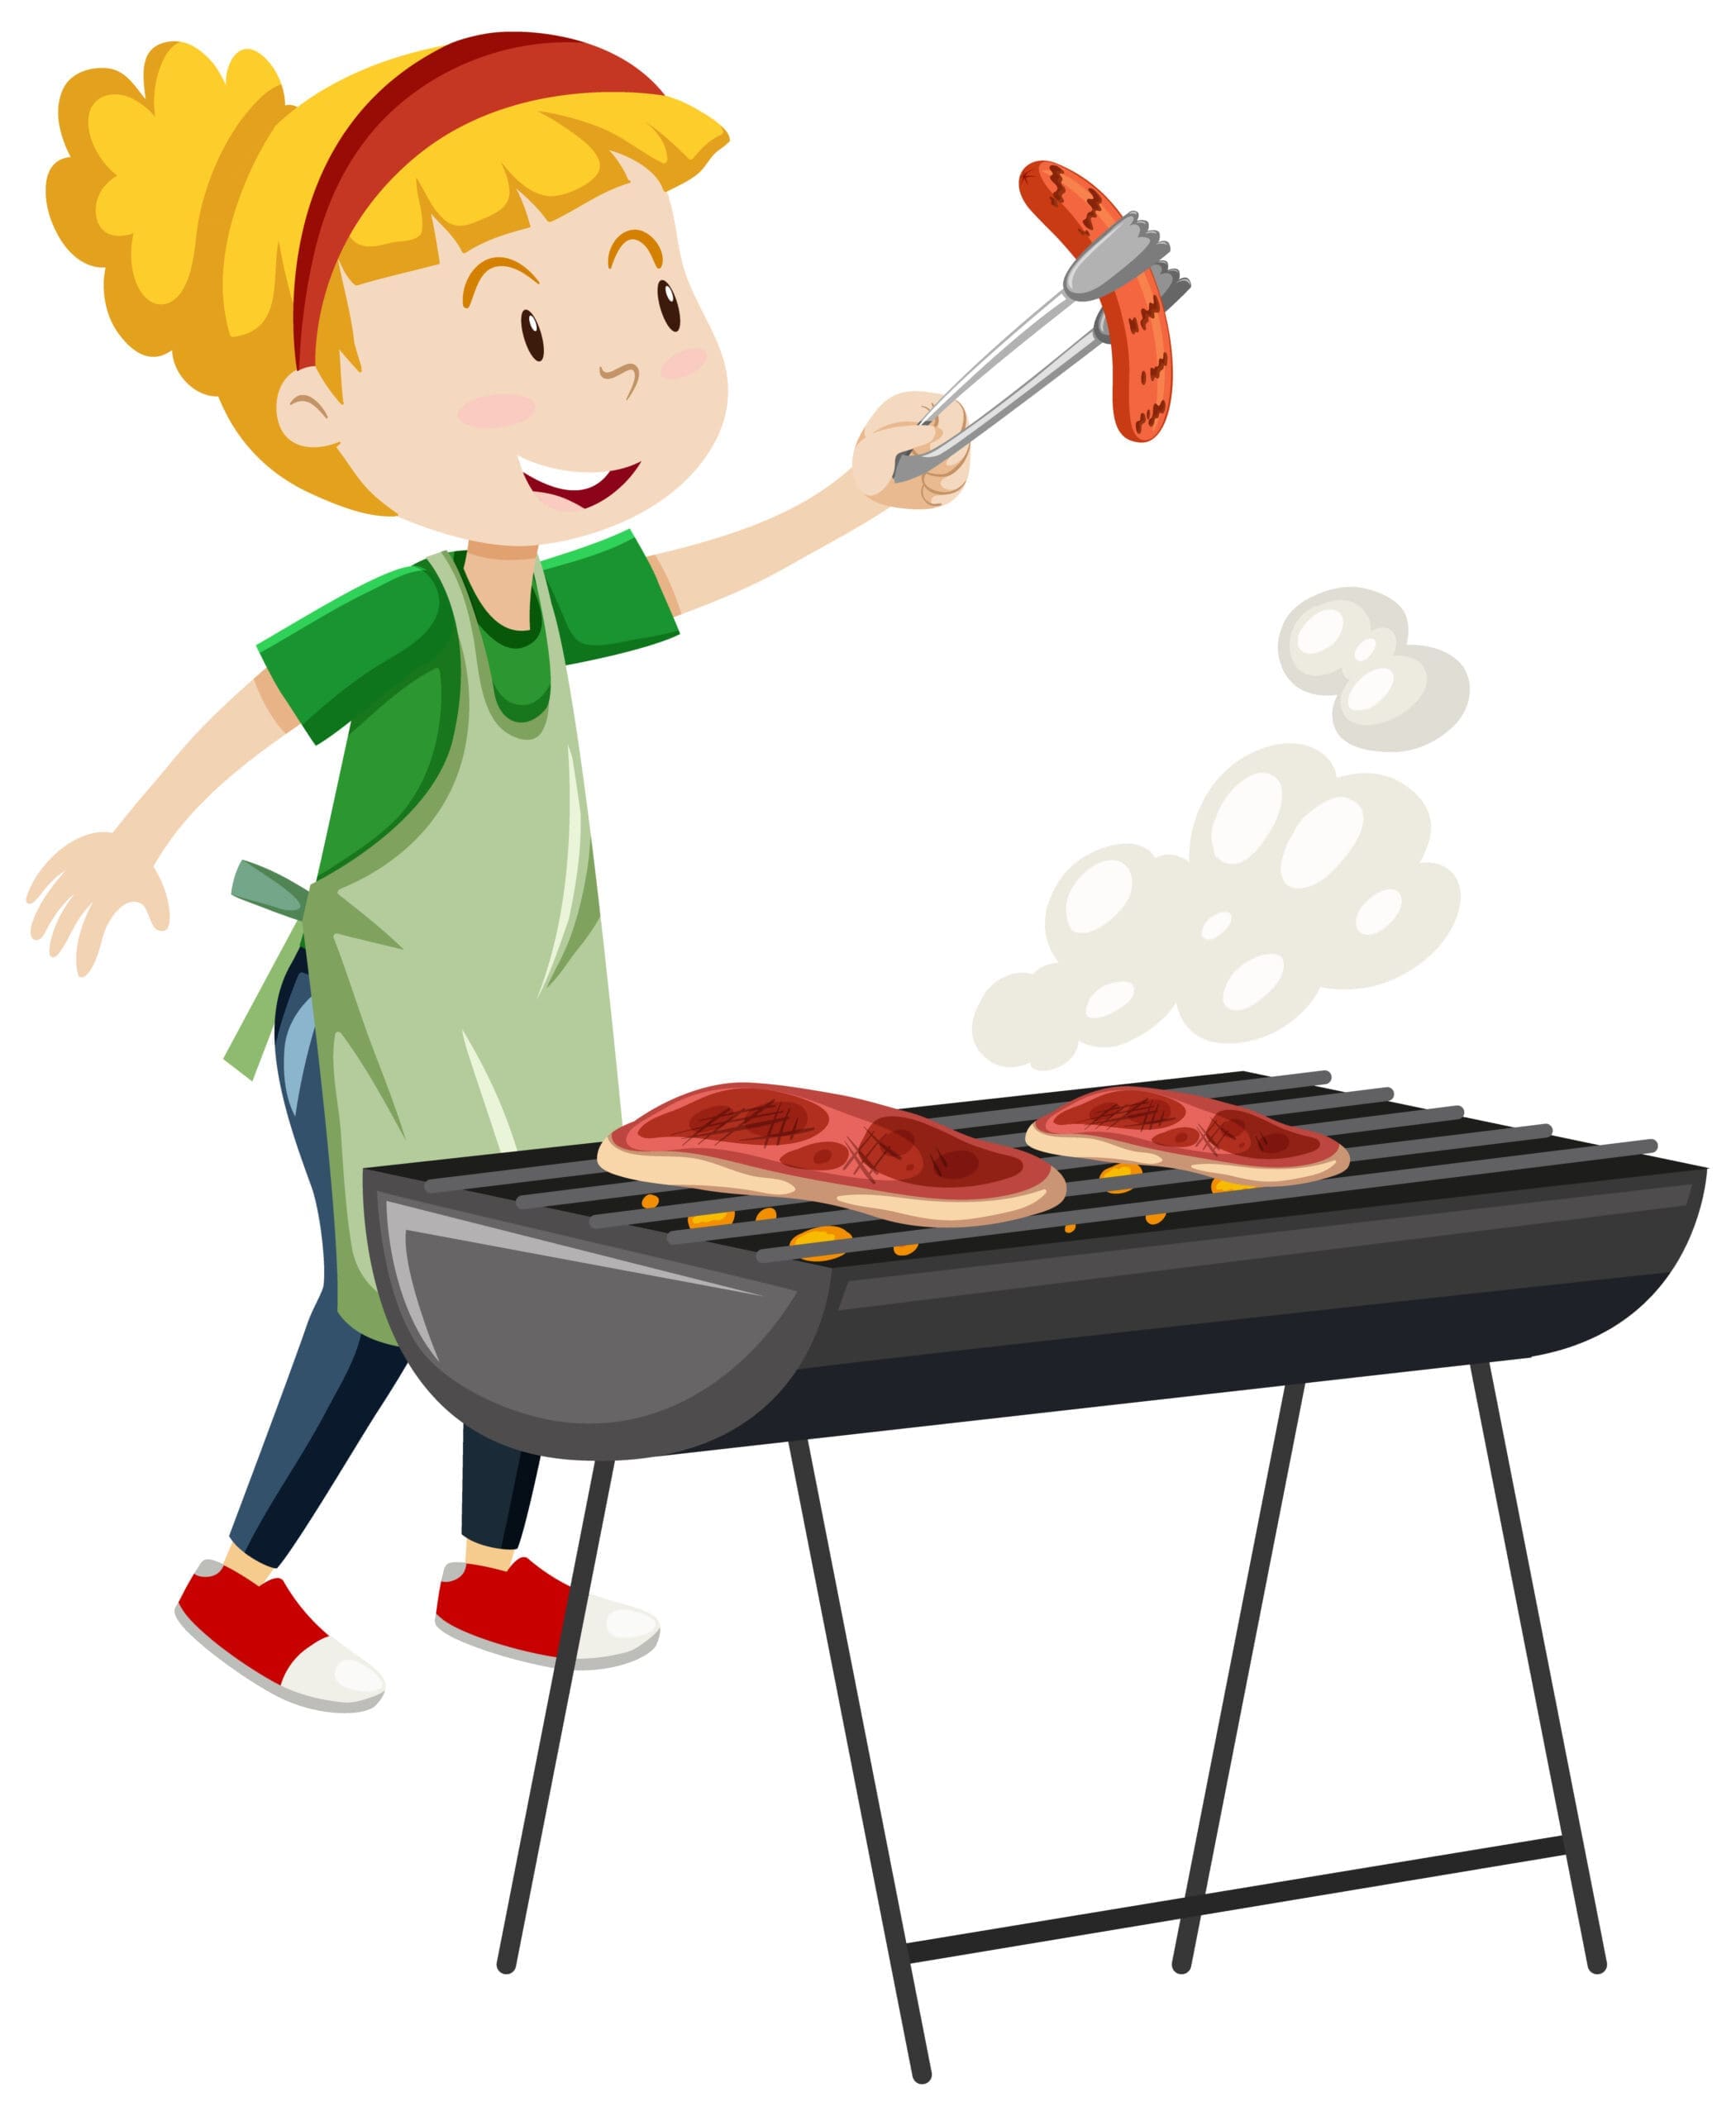 Cartoon graphic of a happy kebab skewer with a chef’s hat and sunglasses on a grill-themed background.